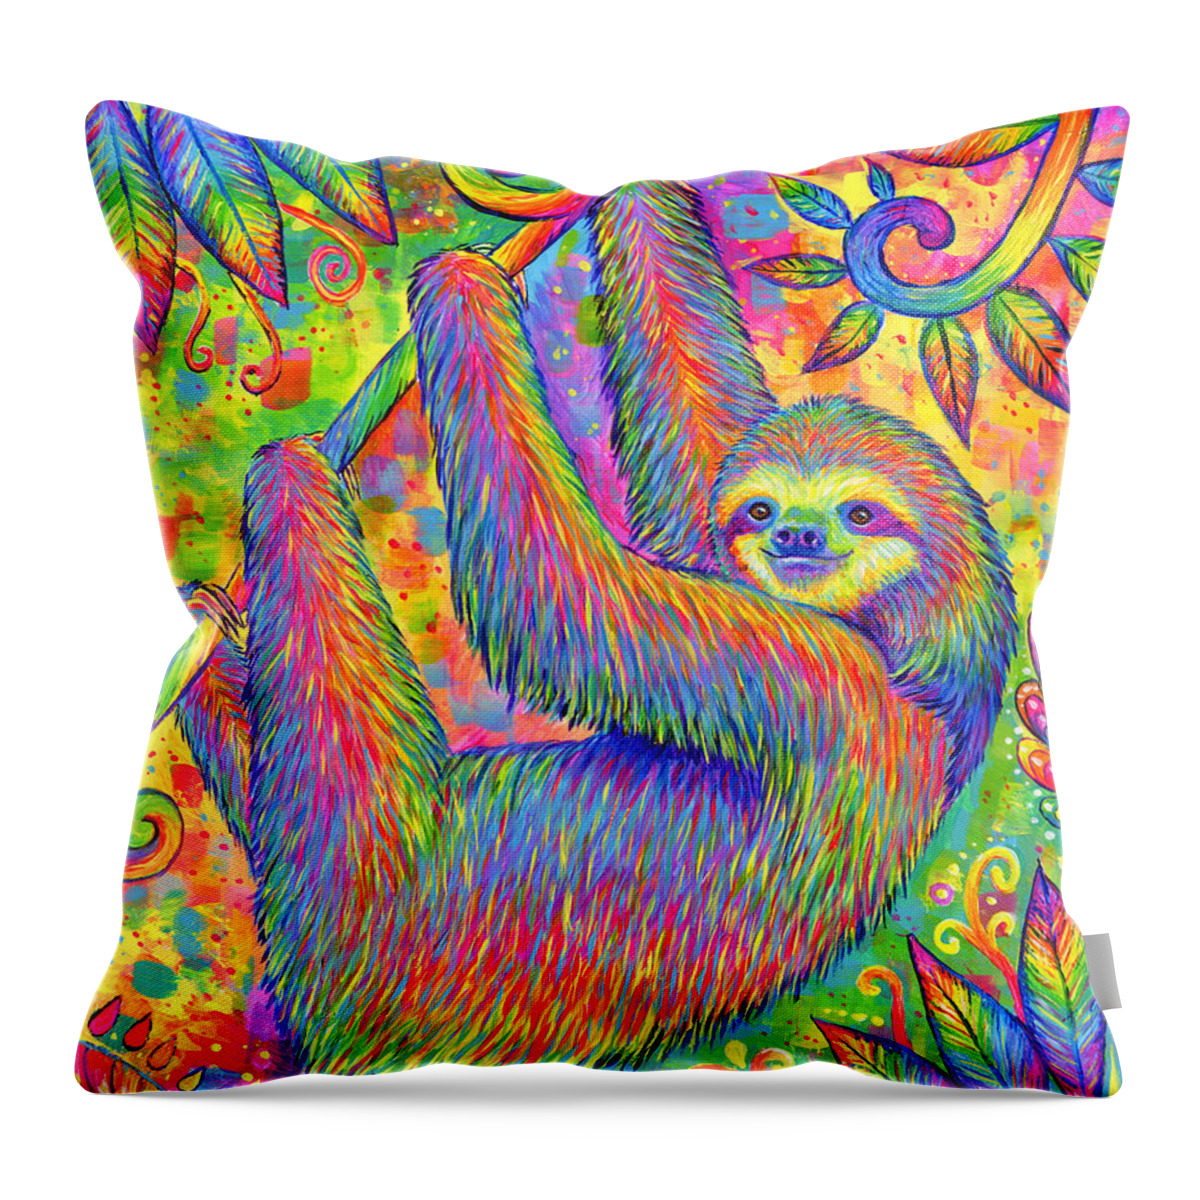 Sloth Throw Pillow featuring the painting Hanging Around - Psychedelic Sloth by Rebecca Wang